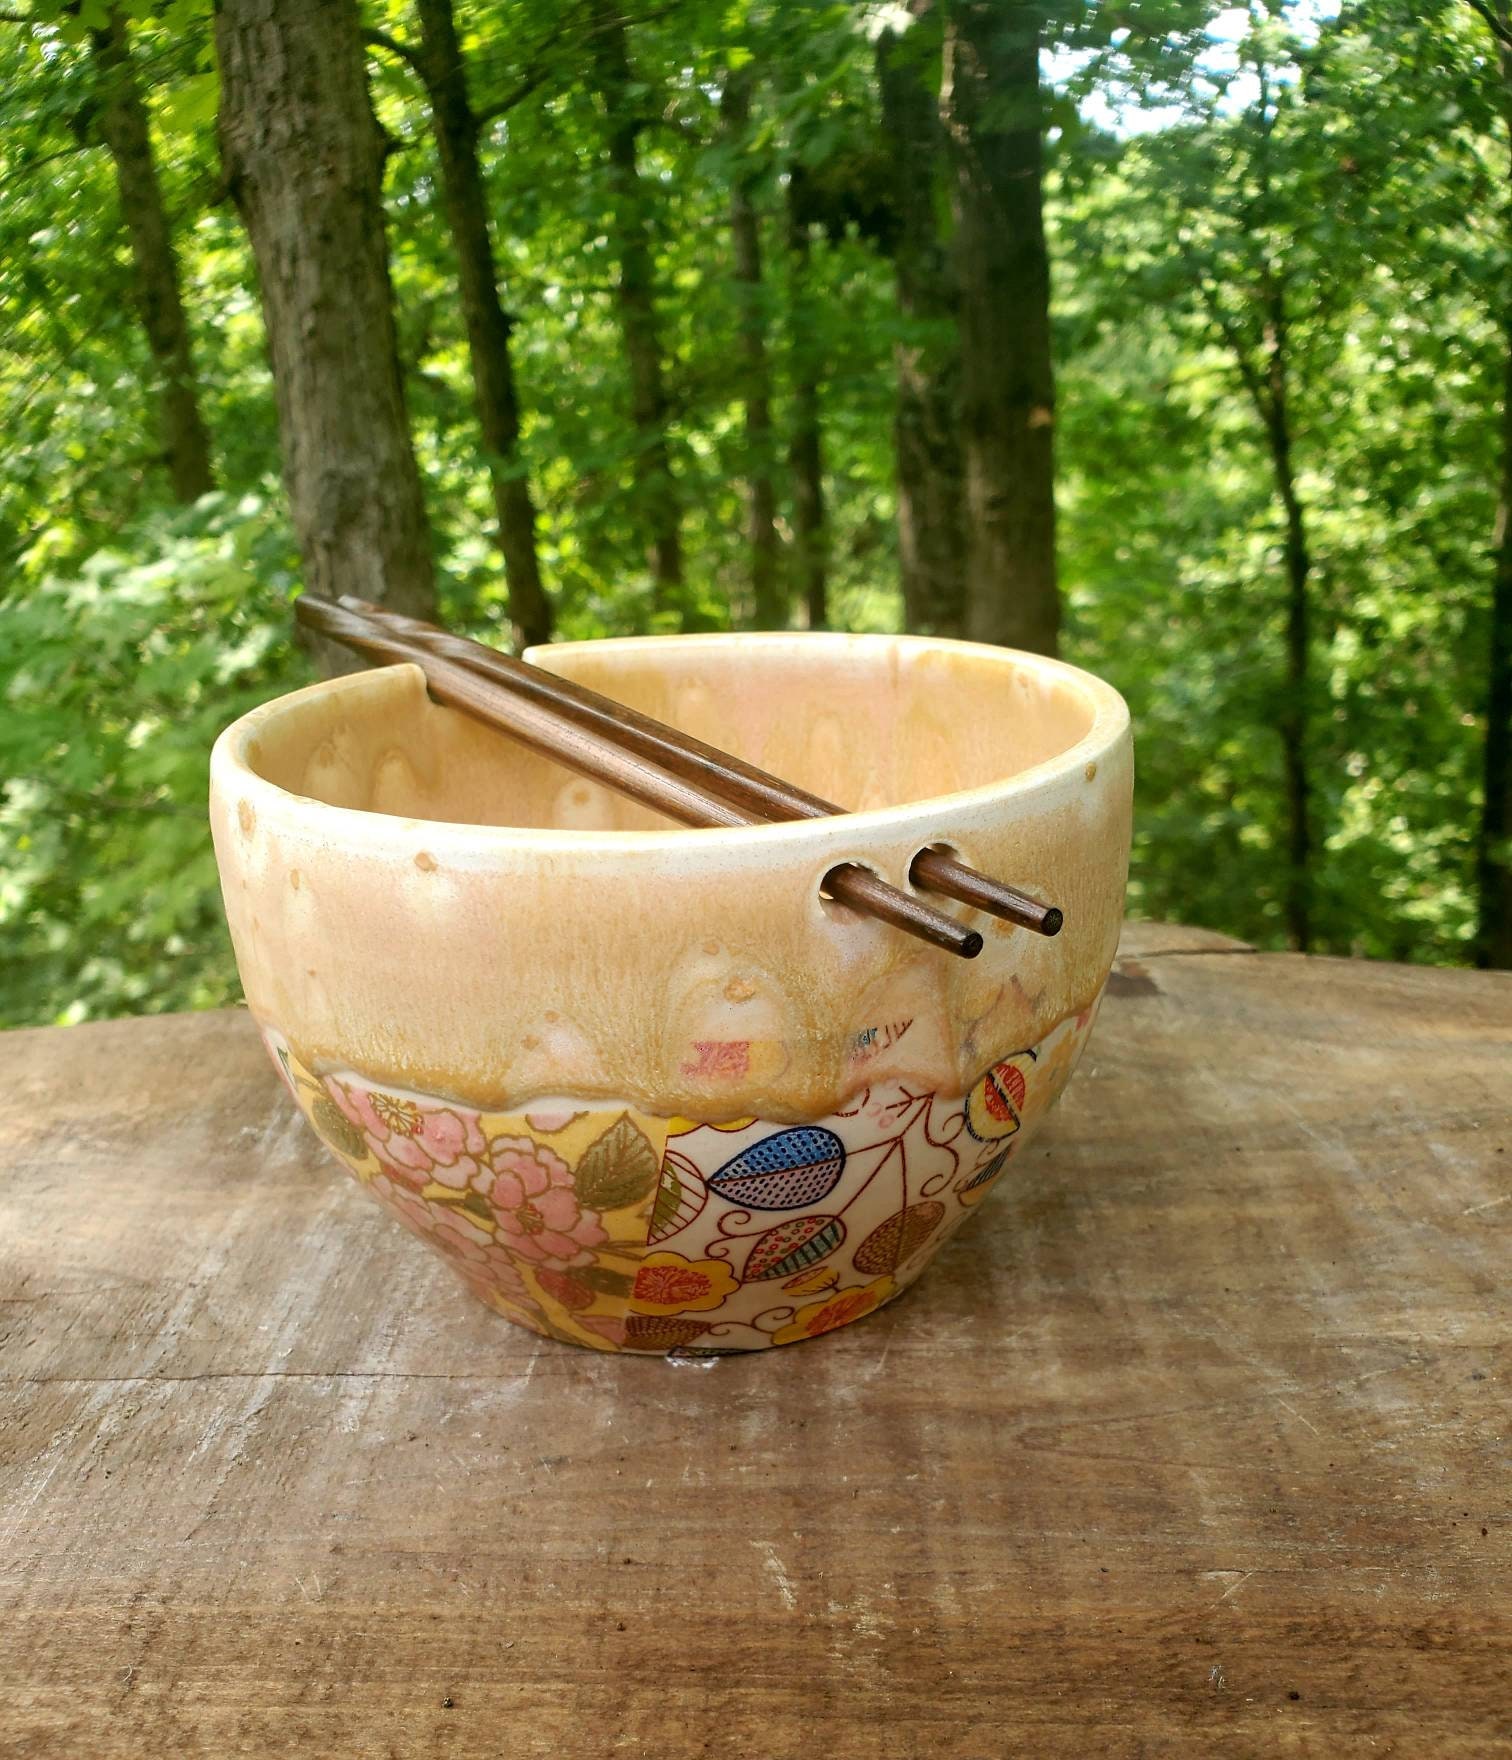 Handmade Noodle Bowl With Chopsticks, Multi Patterned Drippy Glaze, Stoneware, Rice Stir Fry Bowl, 2.5 Cups, Free Shipping